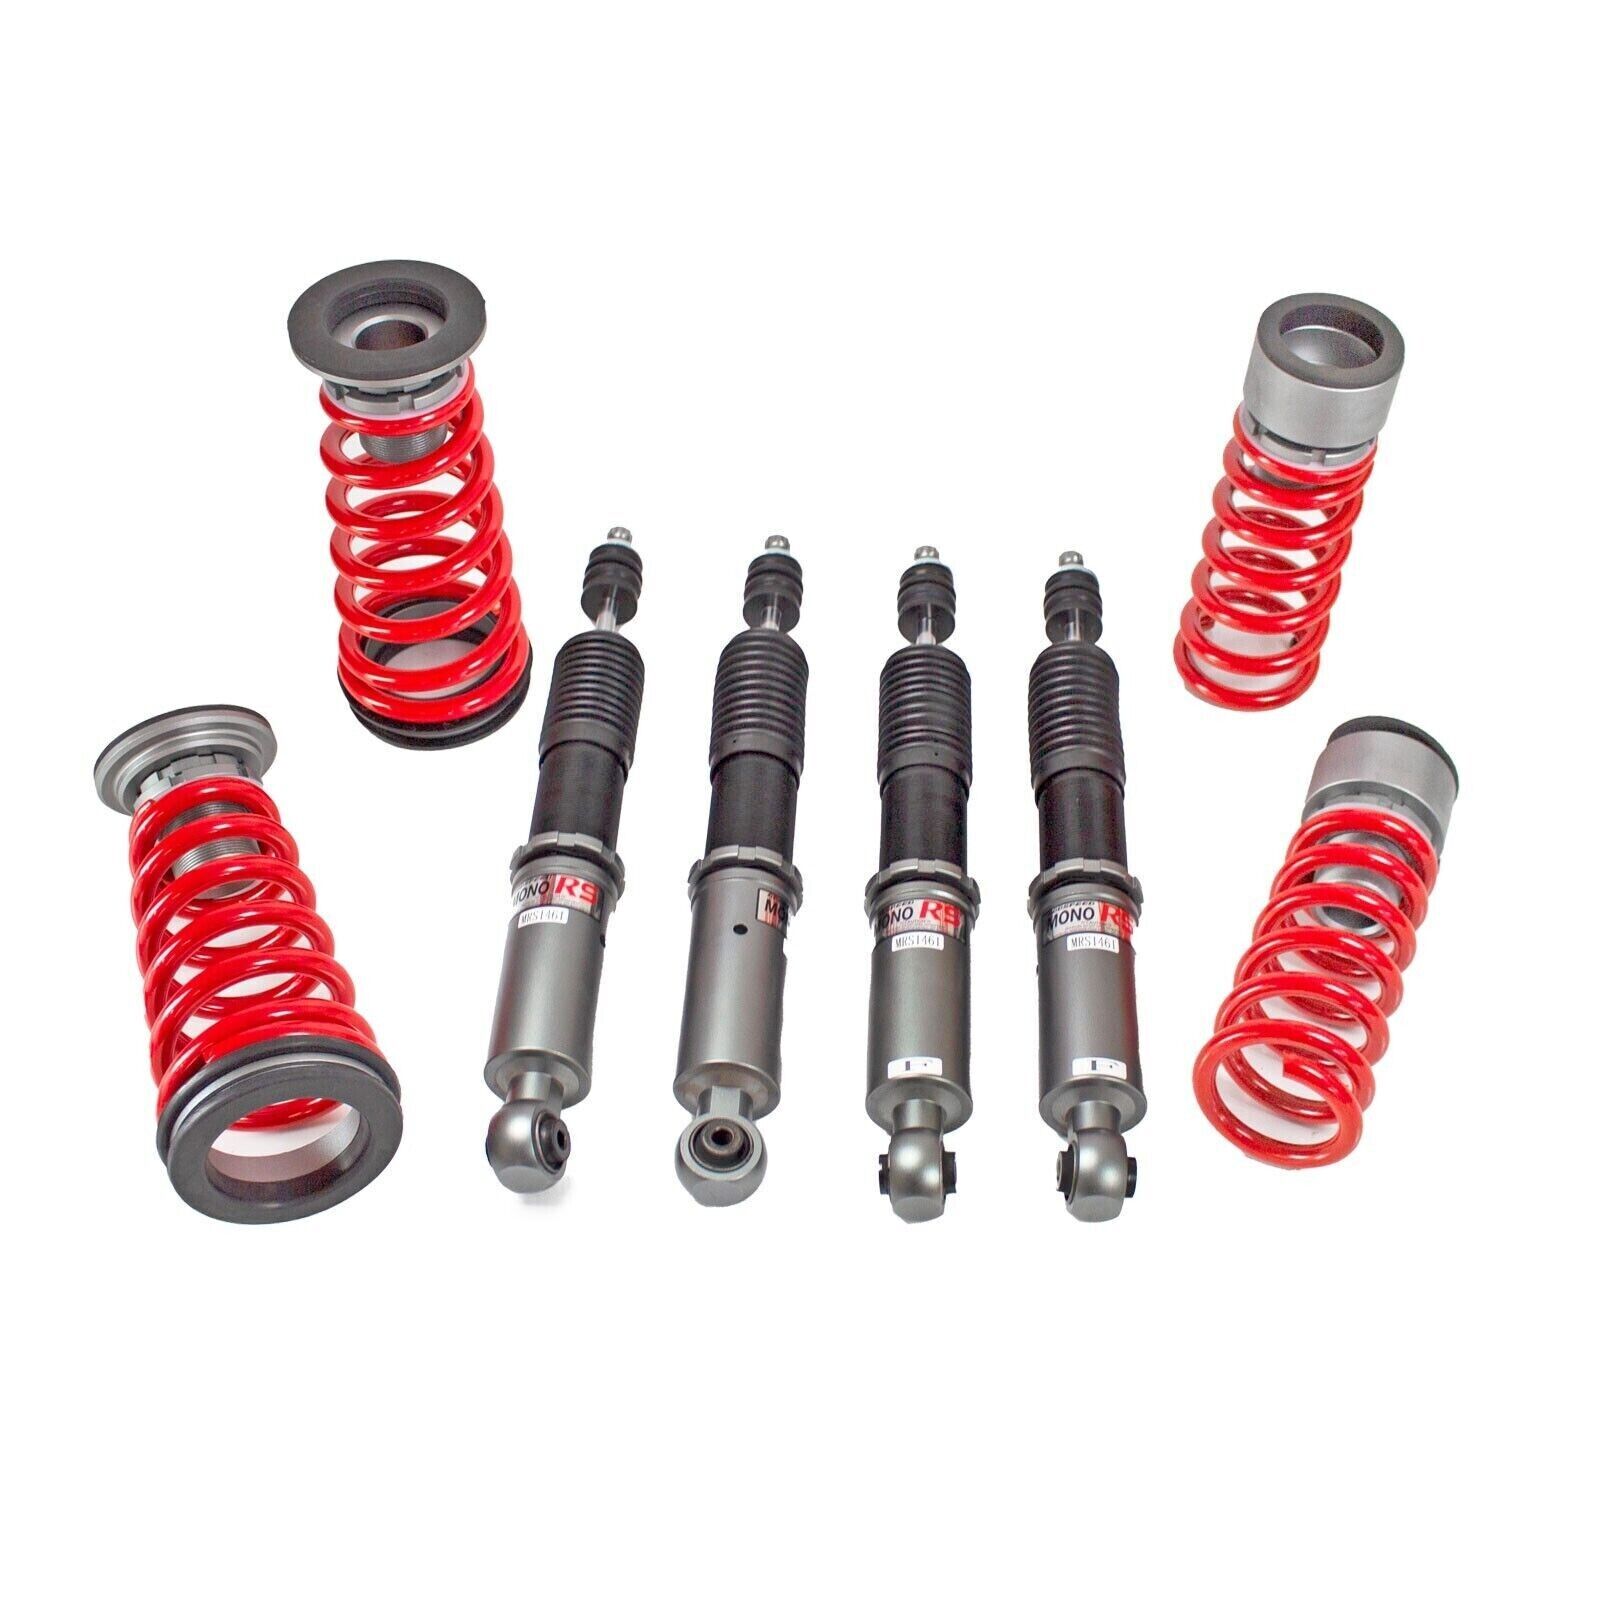 Godspeed Steel Monors Coilovers Fits Mercedes Benz C-Class / E-Class W202 W210